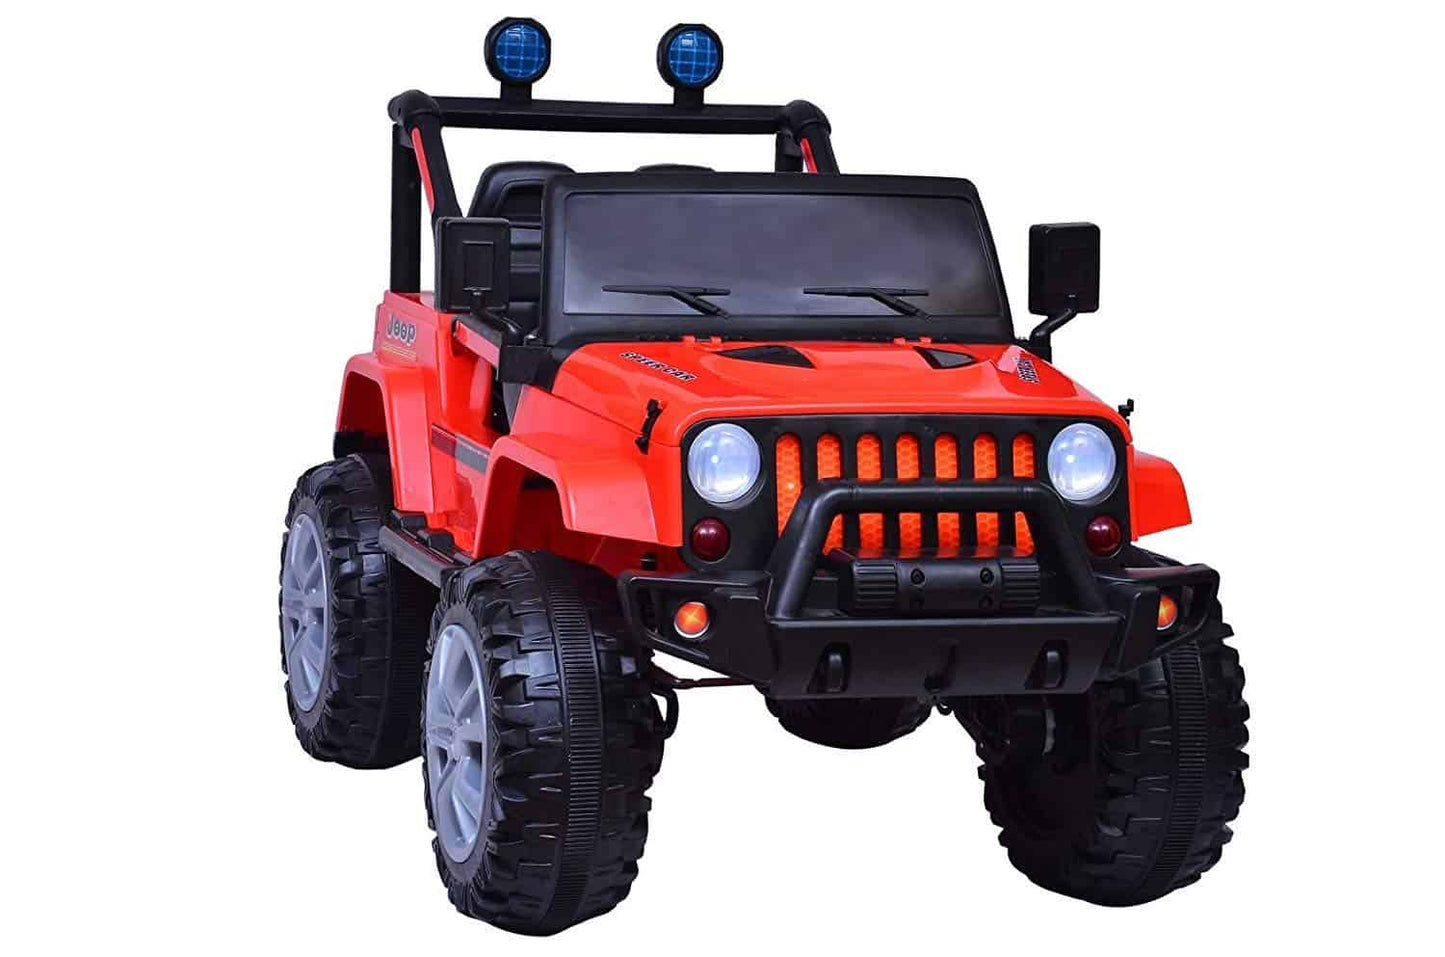 Fliptoy | 12 volt battery powered jeeps (6688) with Music, Lights and Remote Control, Red